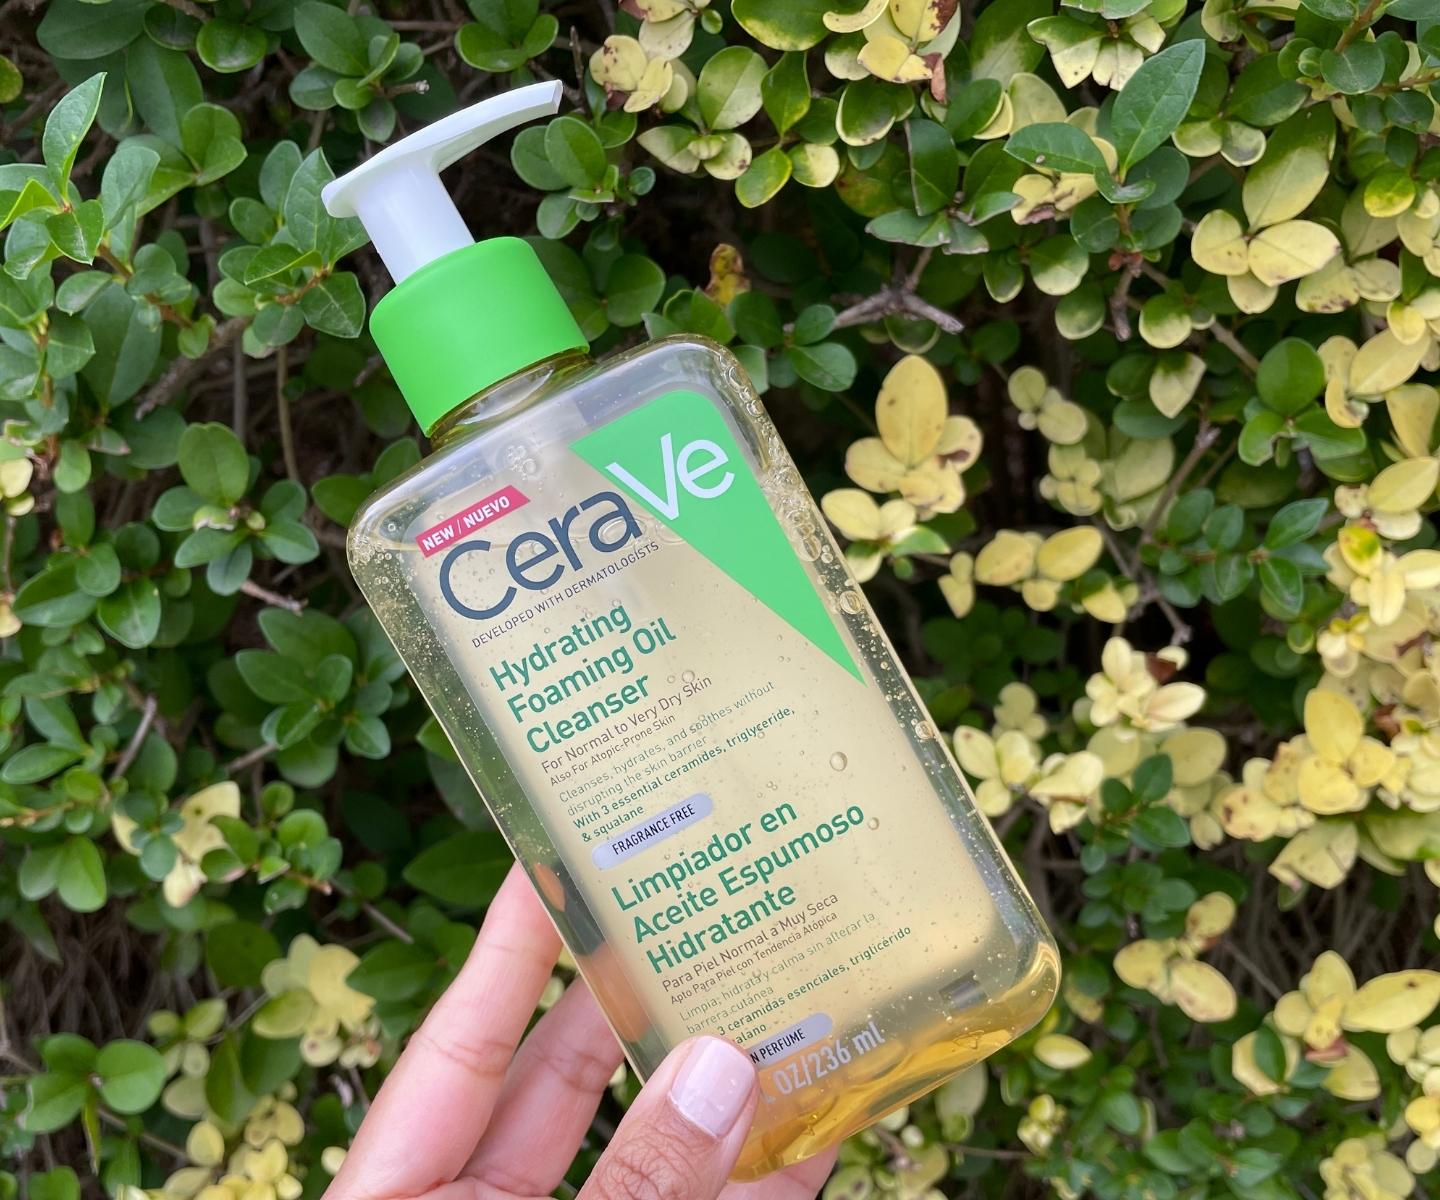 Cerave Hydrating Foaming Oil Cleanser